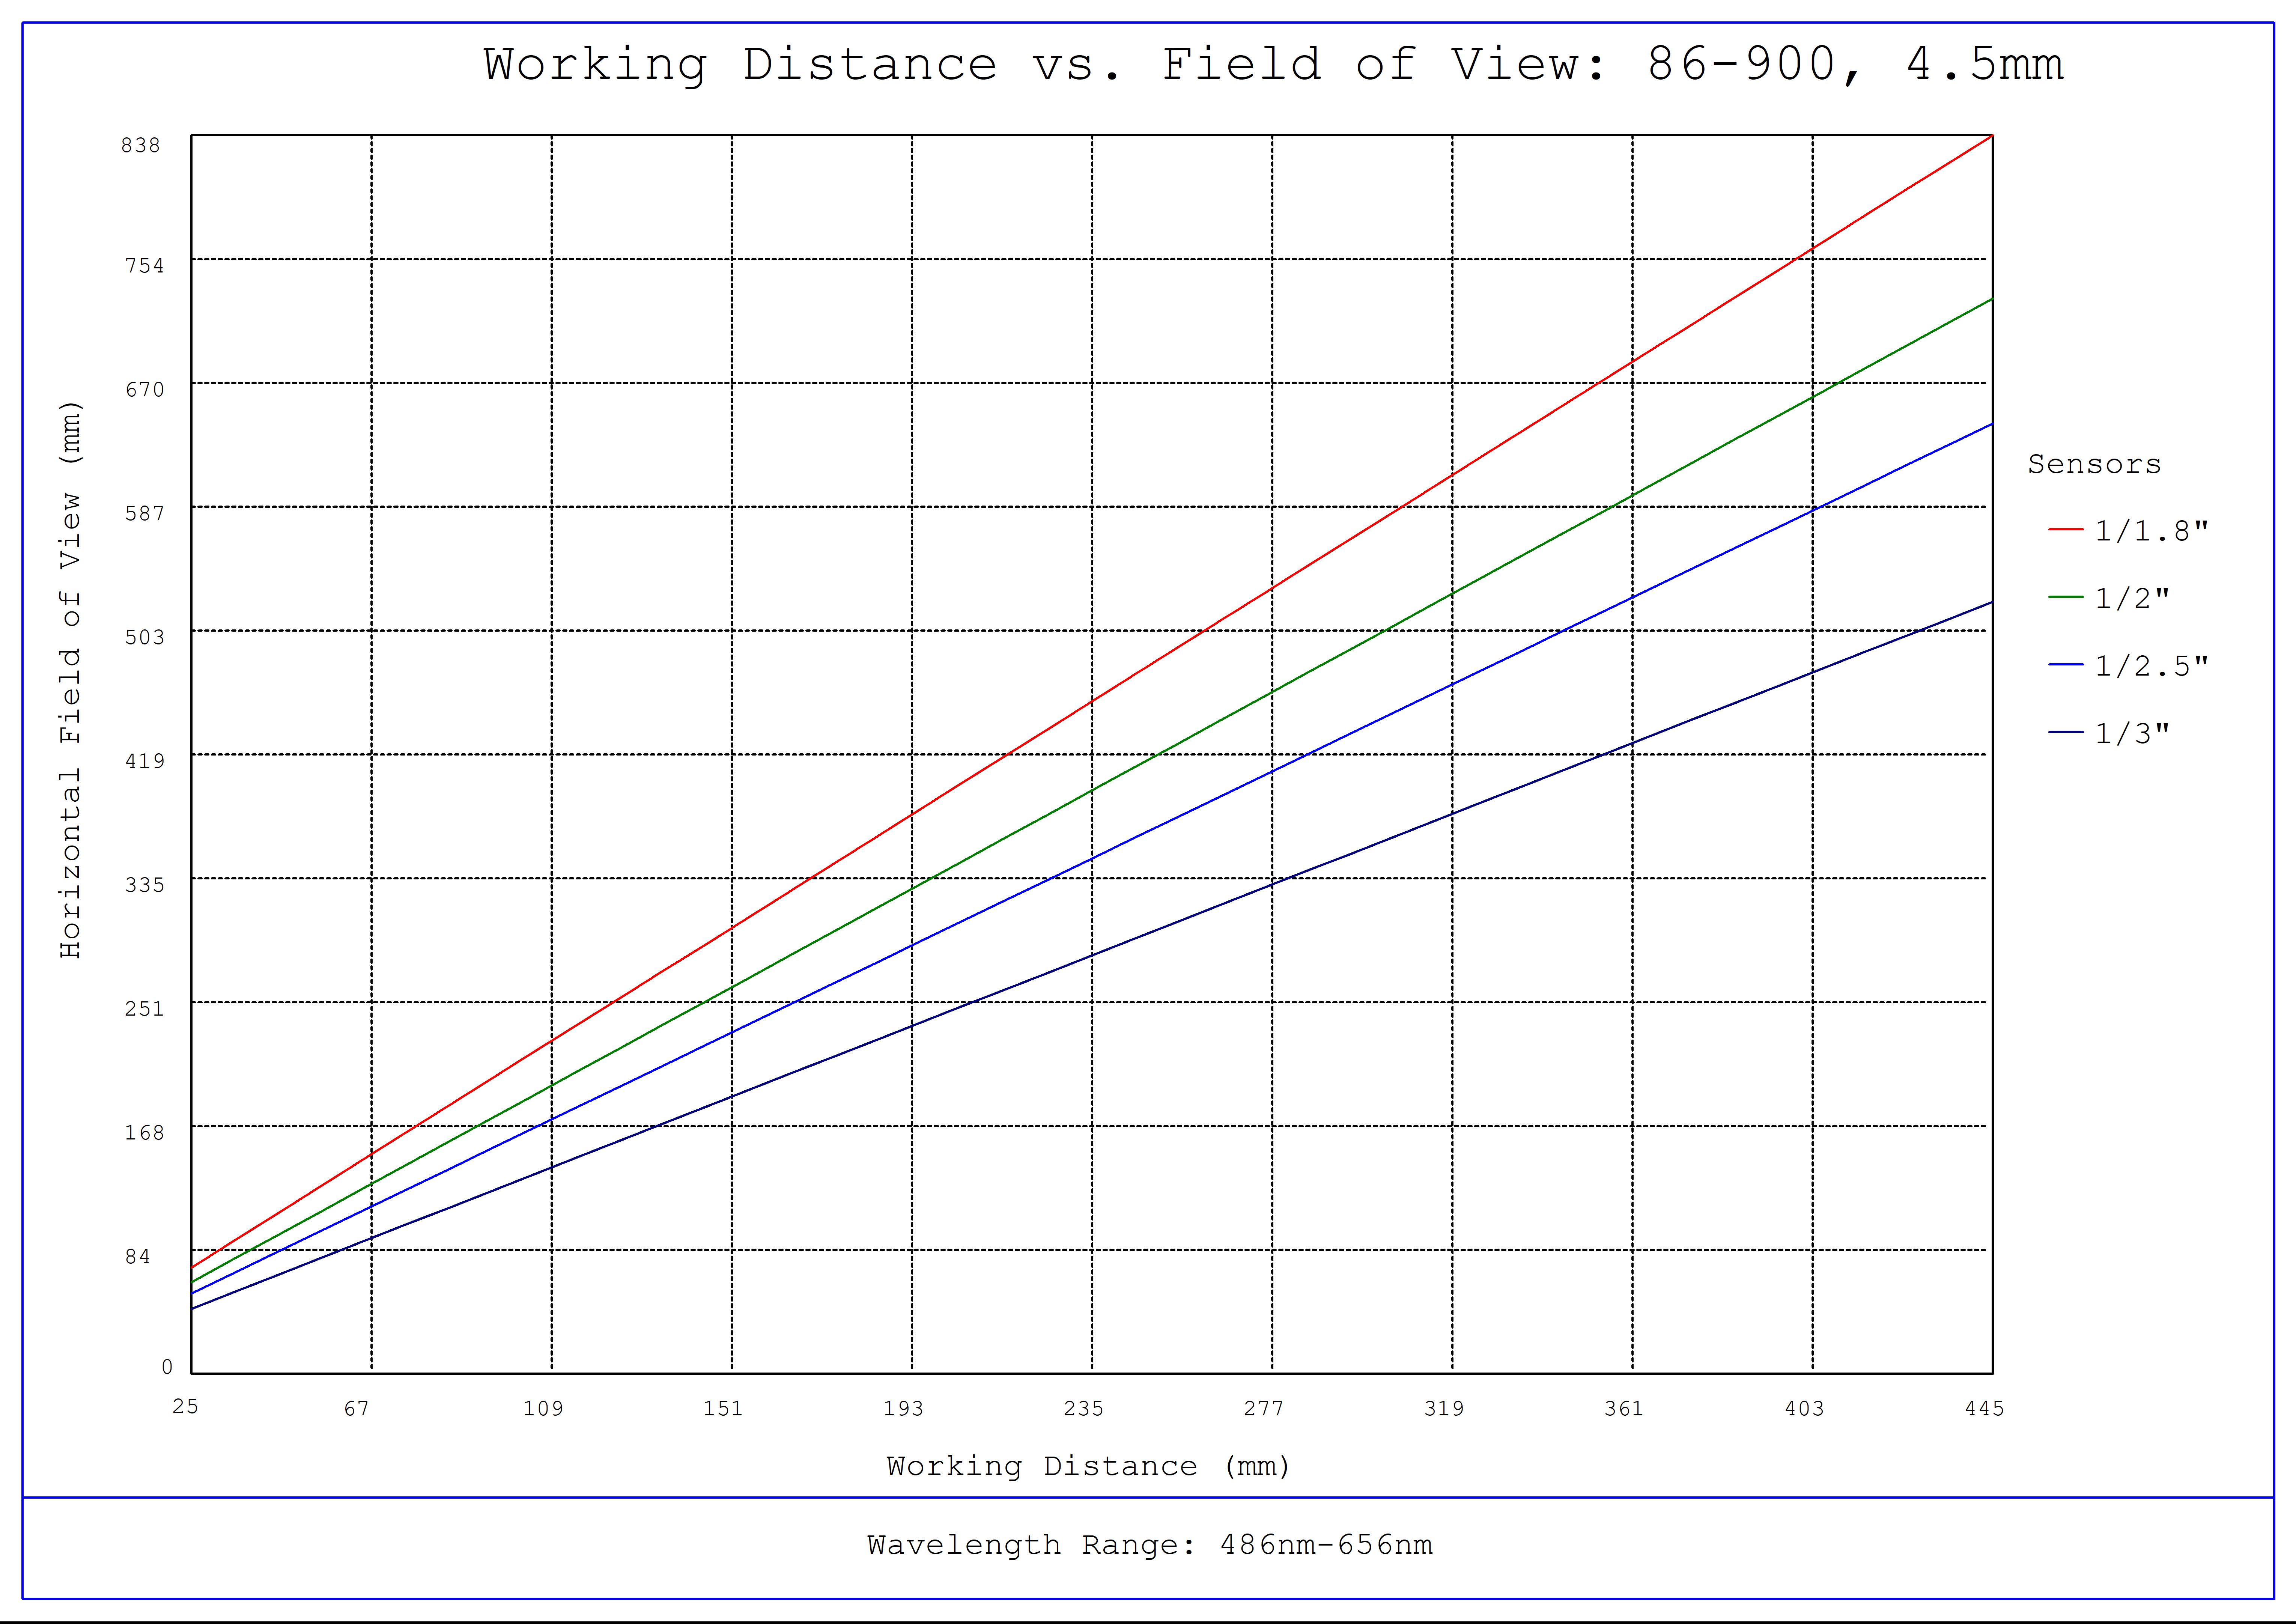 #86-900, 4.5mm C Series Fixed Focal Length Lens, Working Distance versus Field of View Plot